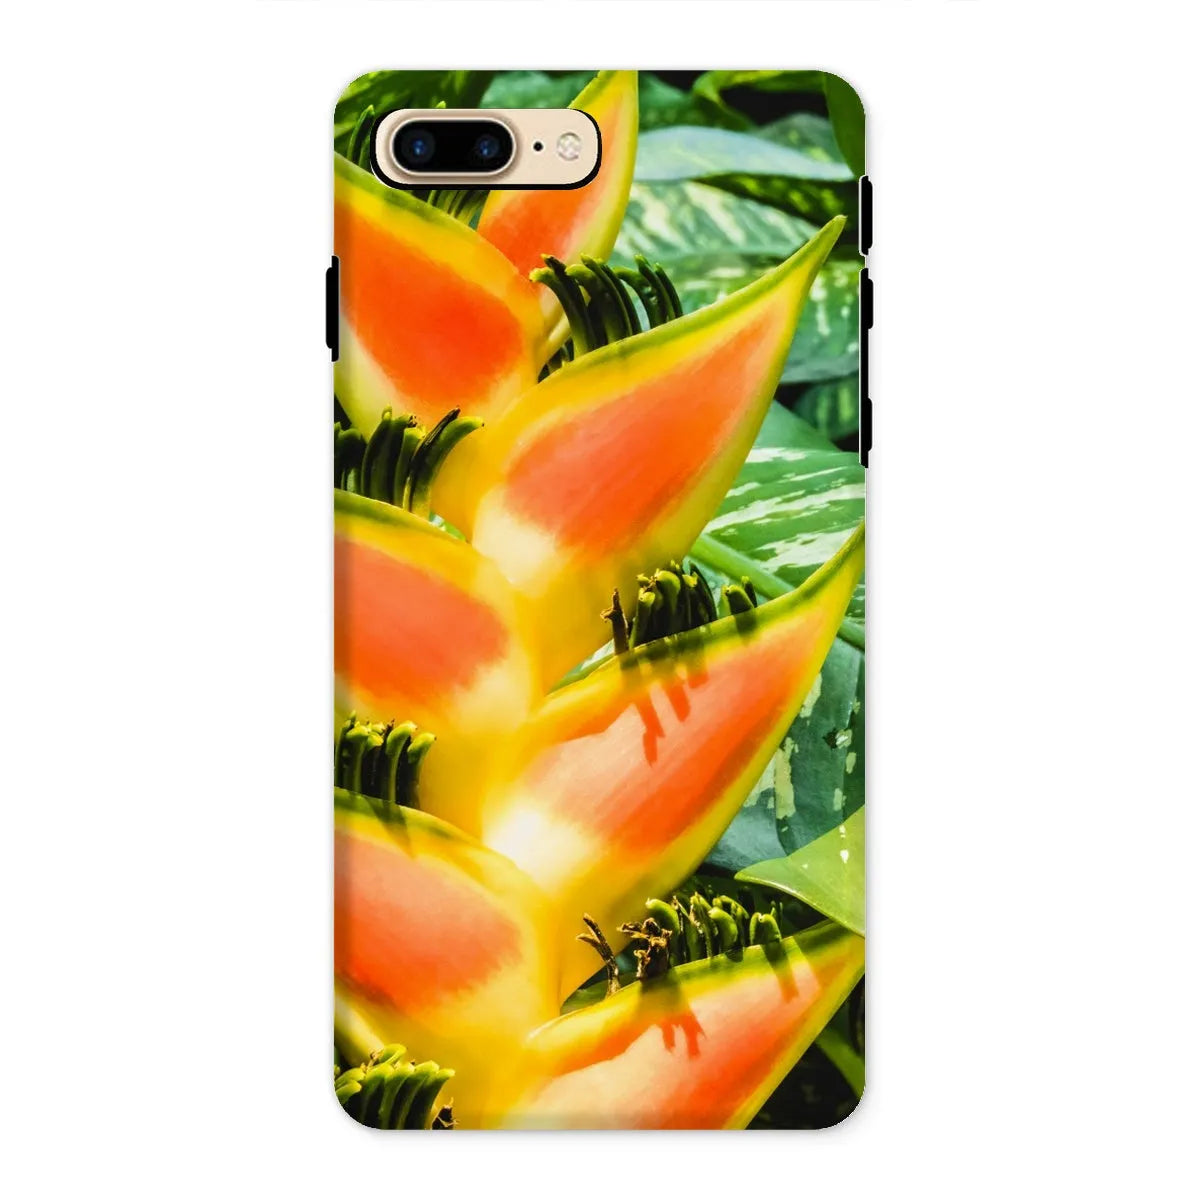 Showstopper Tough Phone Case - Iphone 8 Plus / Matte - Mobile Phone Cases - Aesthetic Art